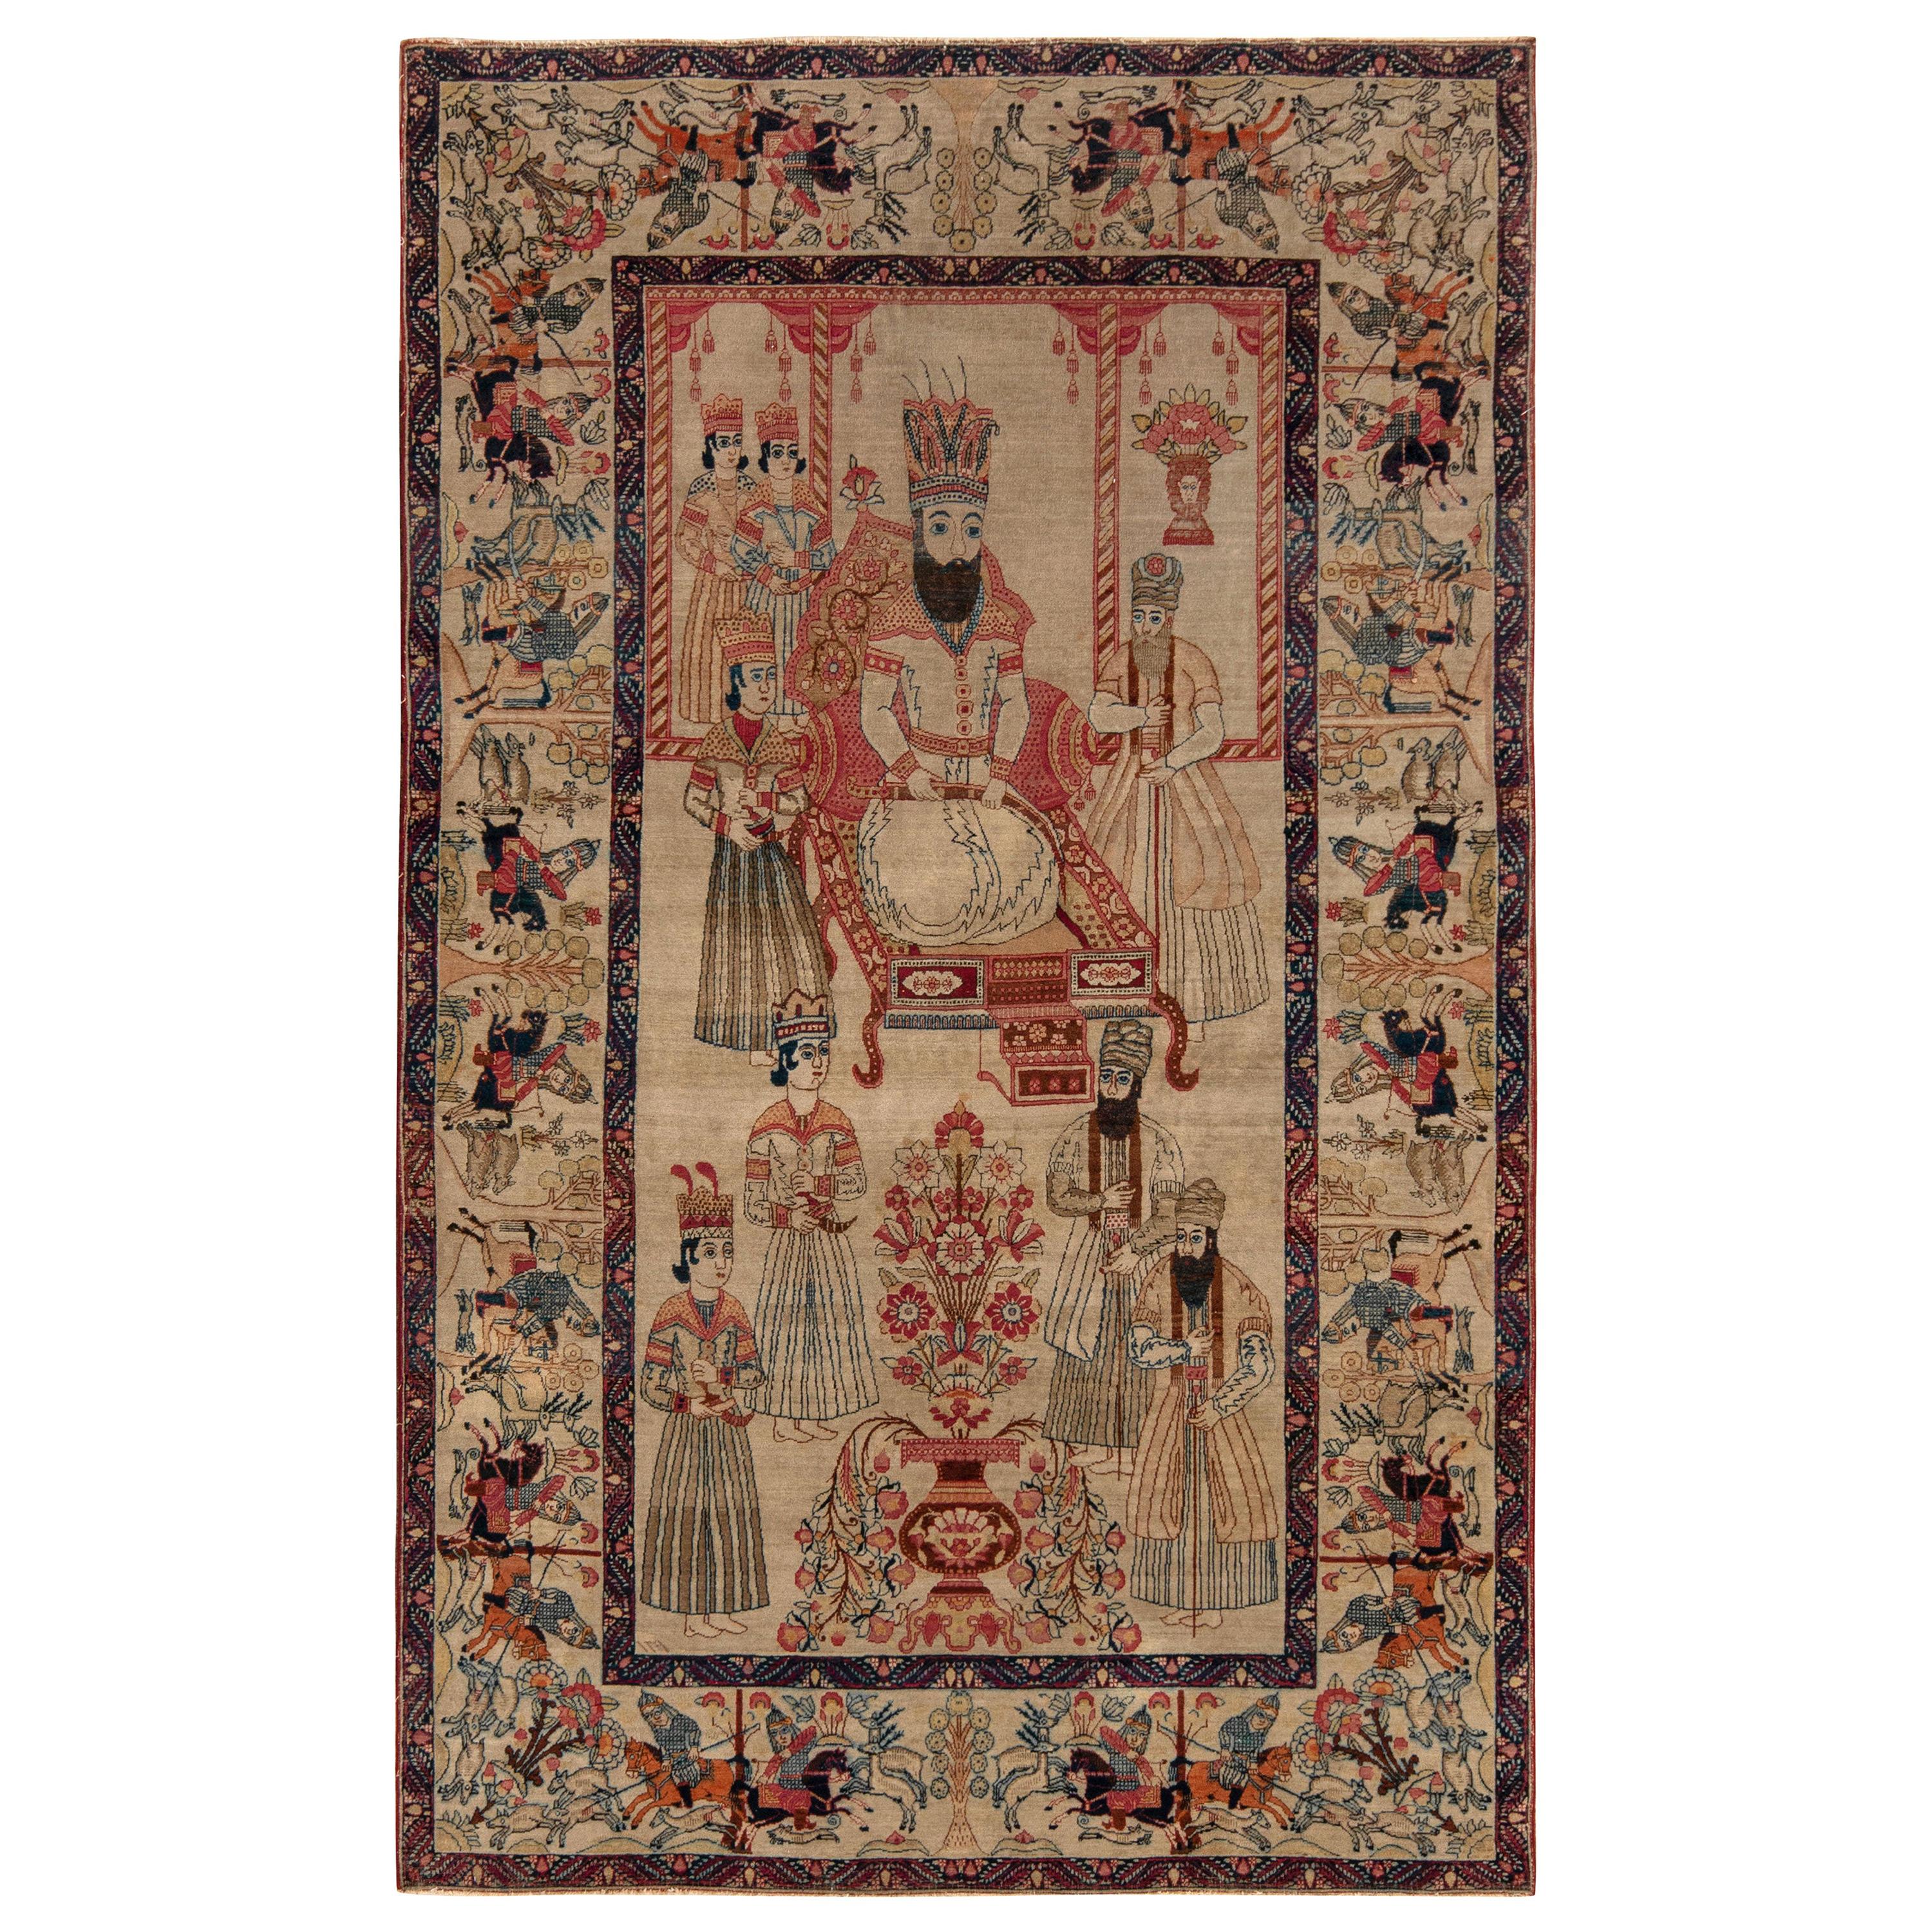  Antique Kerman Rug in Beige-Brown and Red Pictorial Pattern by Rug & Kilim For Sale